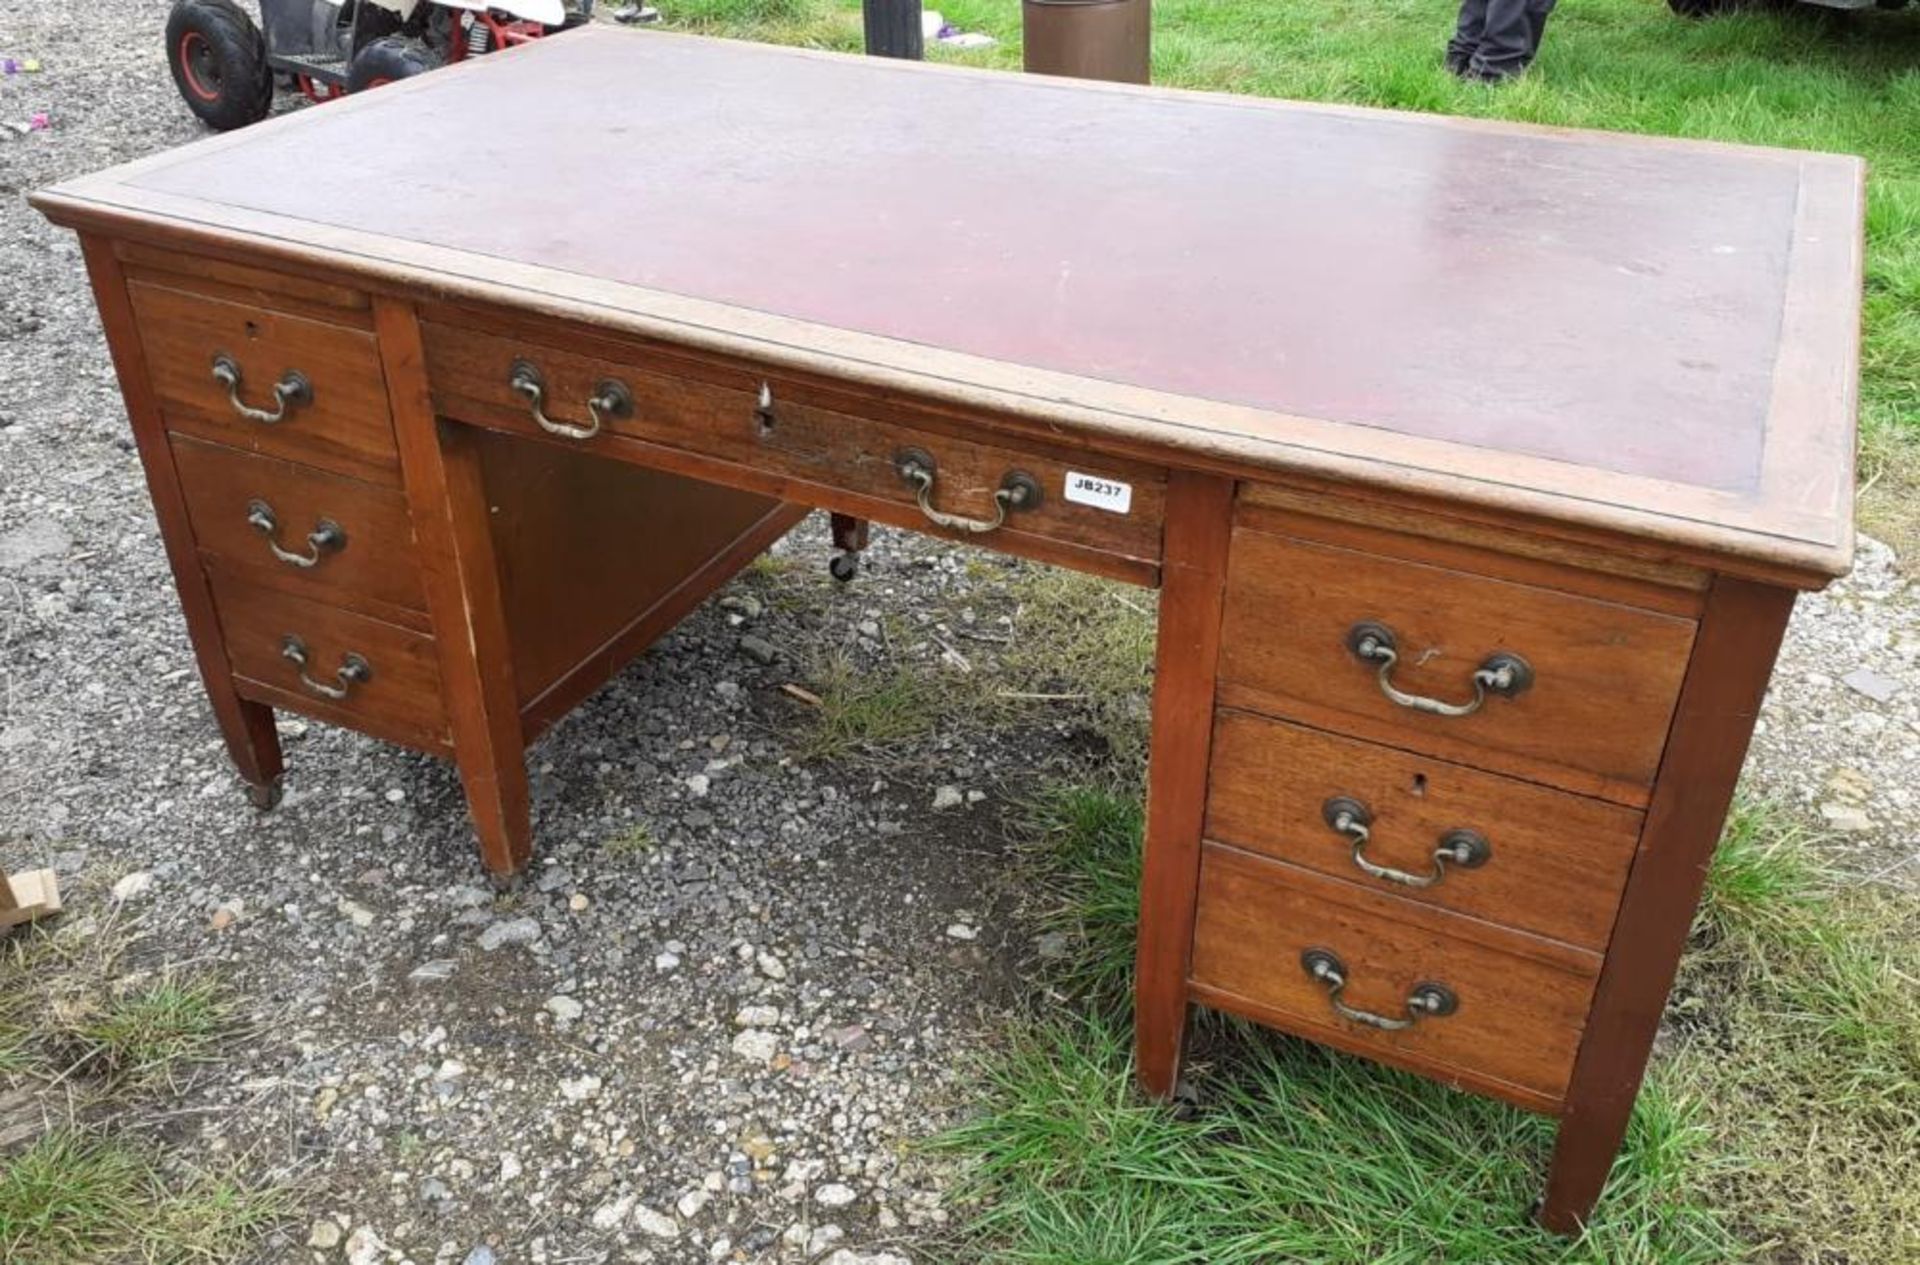 1 x Large Original Writing Desk With Leather Top Pad And Deep Drawers With Original Castors Under - Image 11 of 13